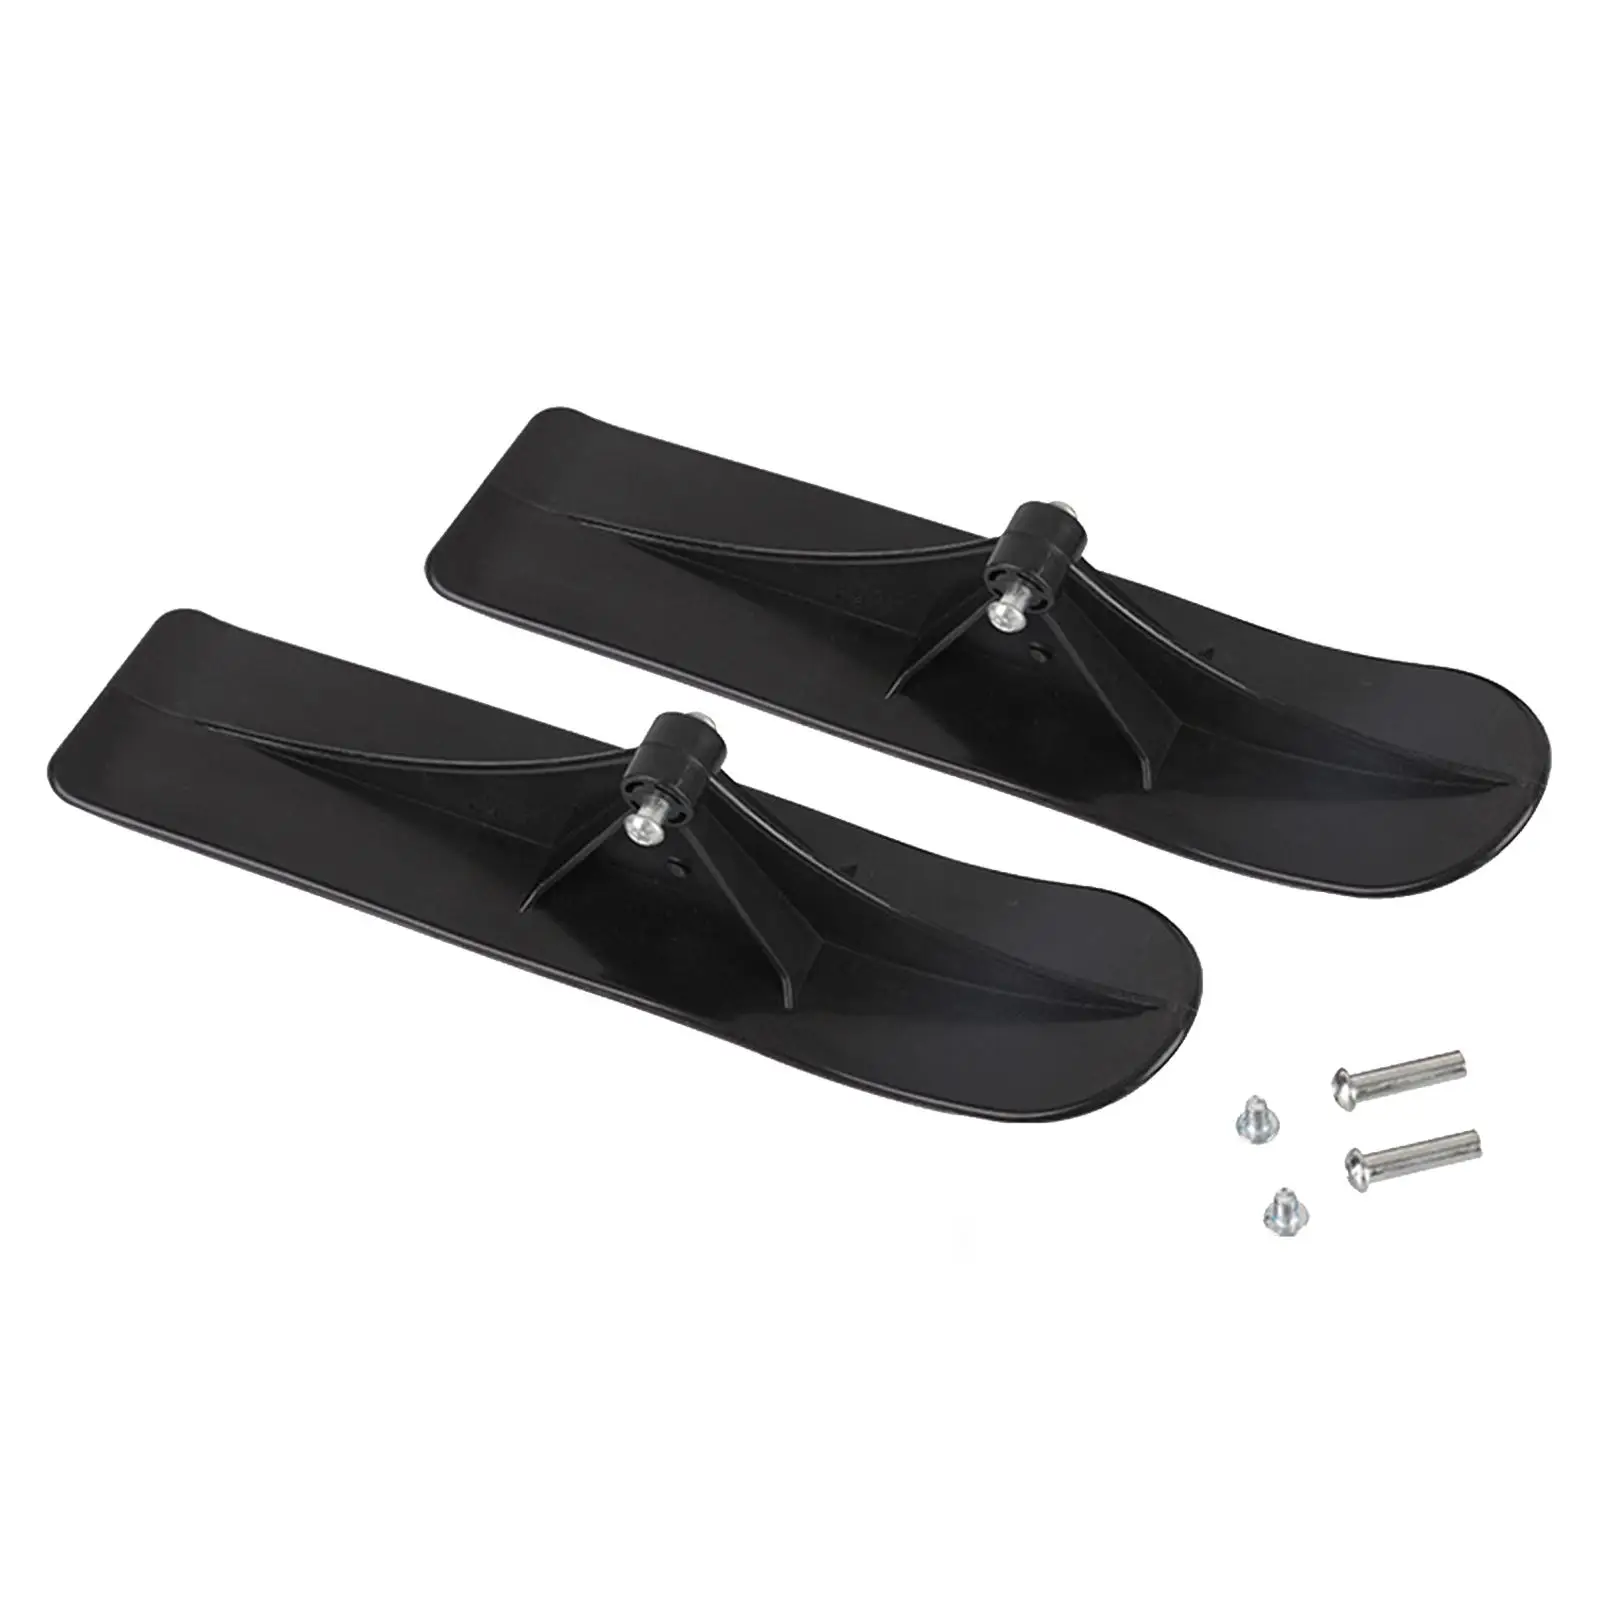 Snow Scooter Ski Sled Multifunctional Toboggan Refit Boots Snowmobile Attachment Universal Ski Board for Outdoor Winter Beginner